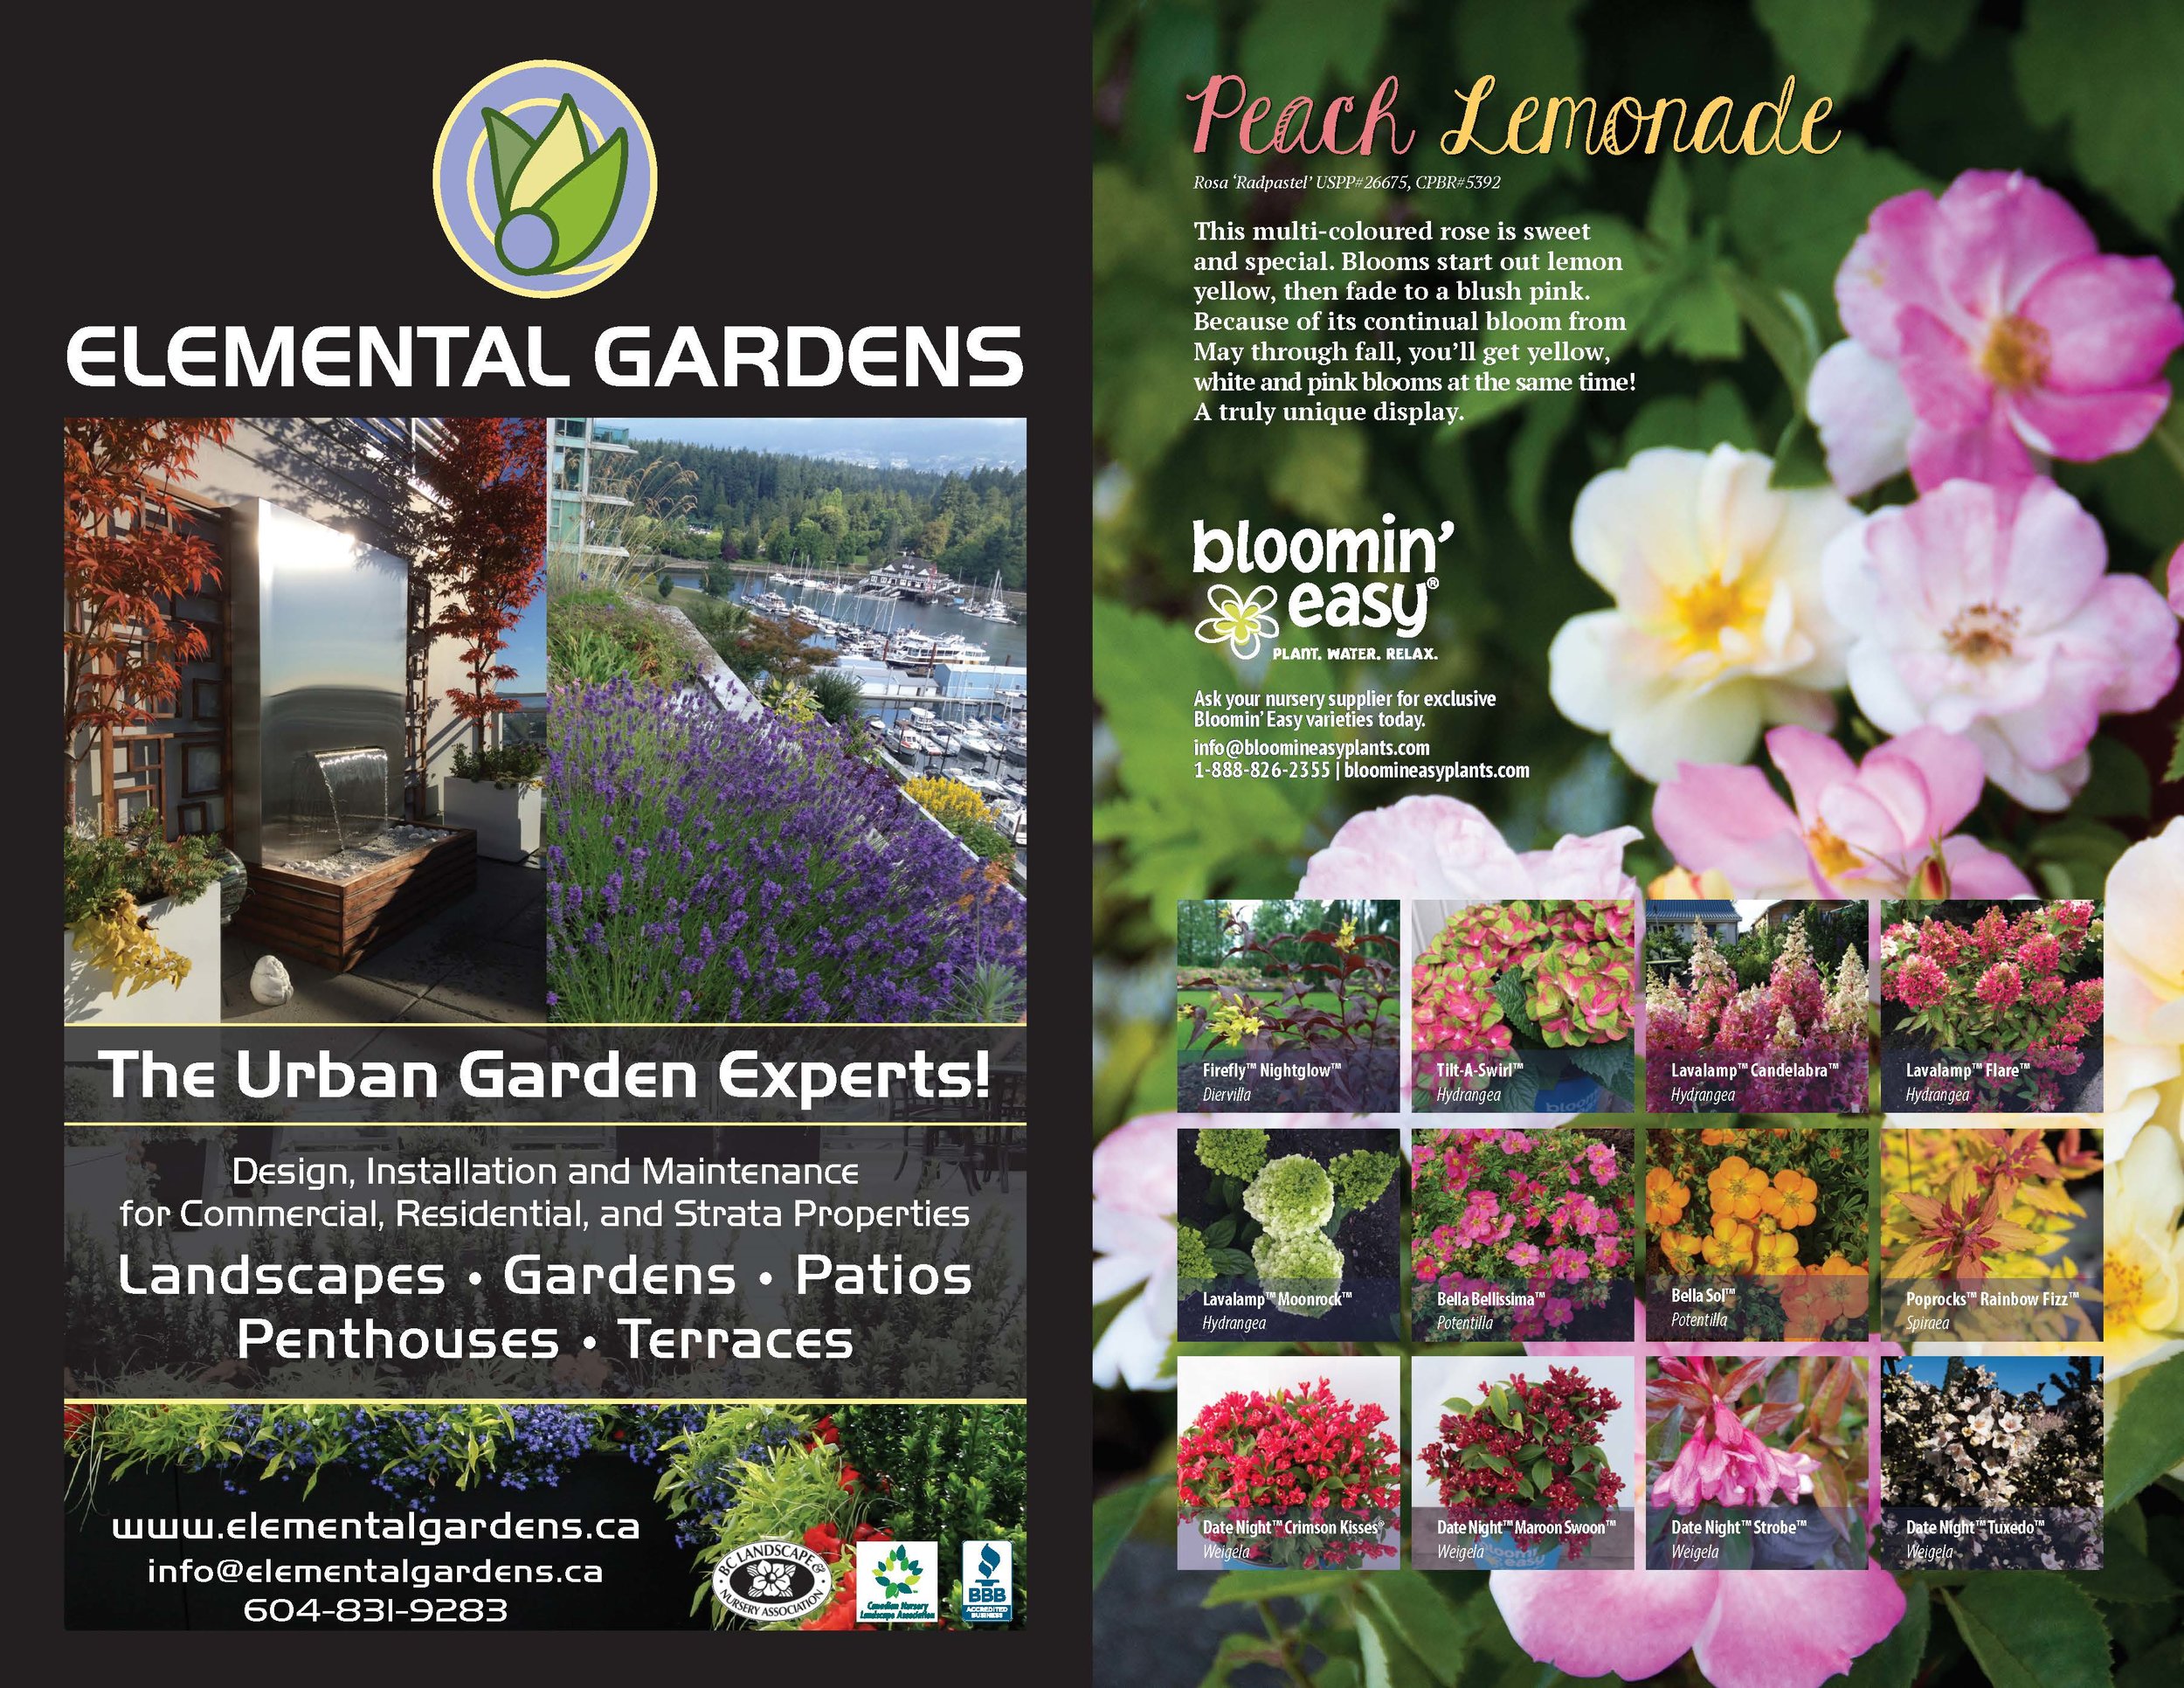 BCLNA_GardenWise_Booklet_FA_ReaderSpreads_Page_02.jpg